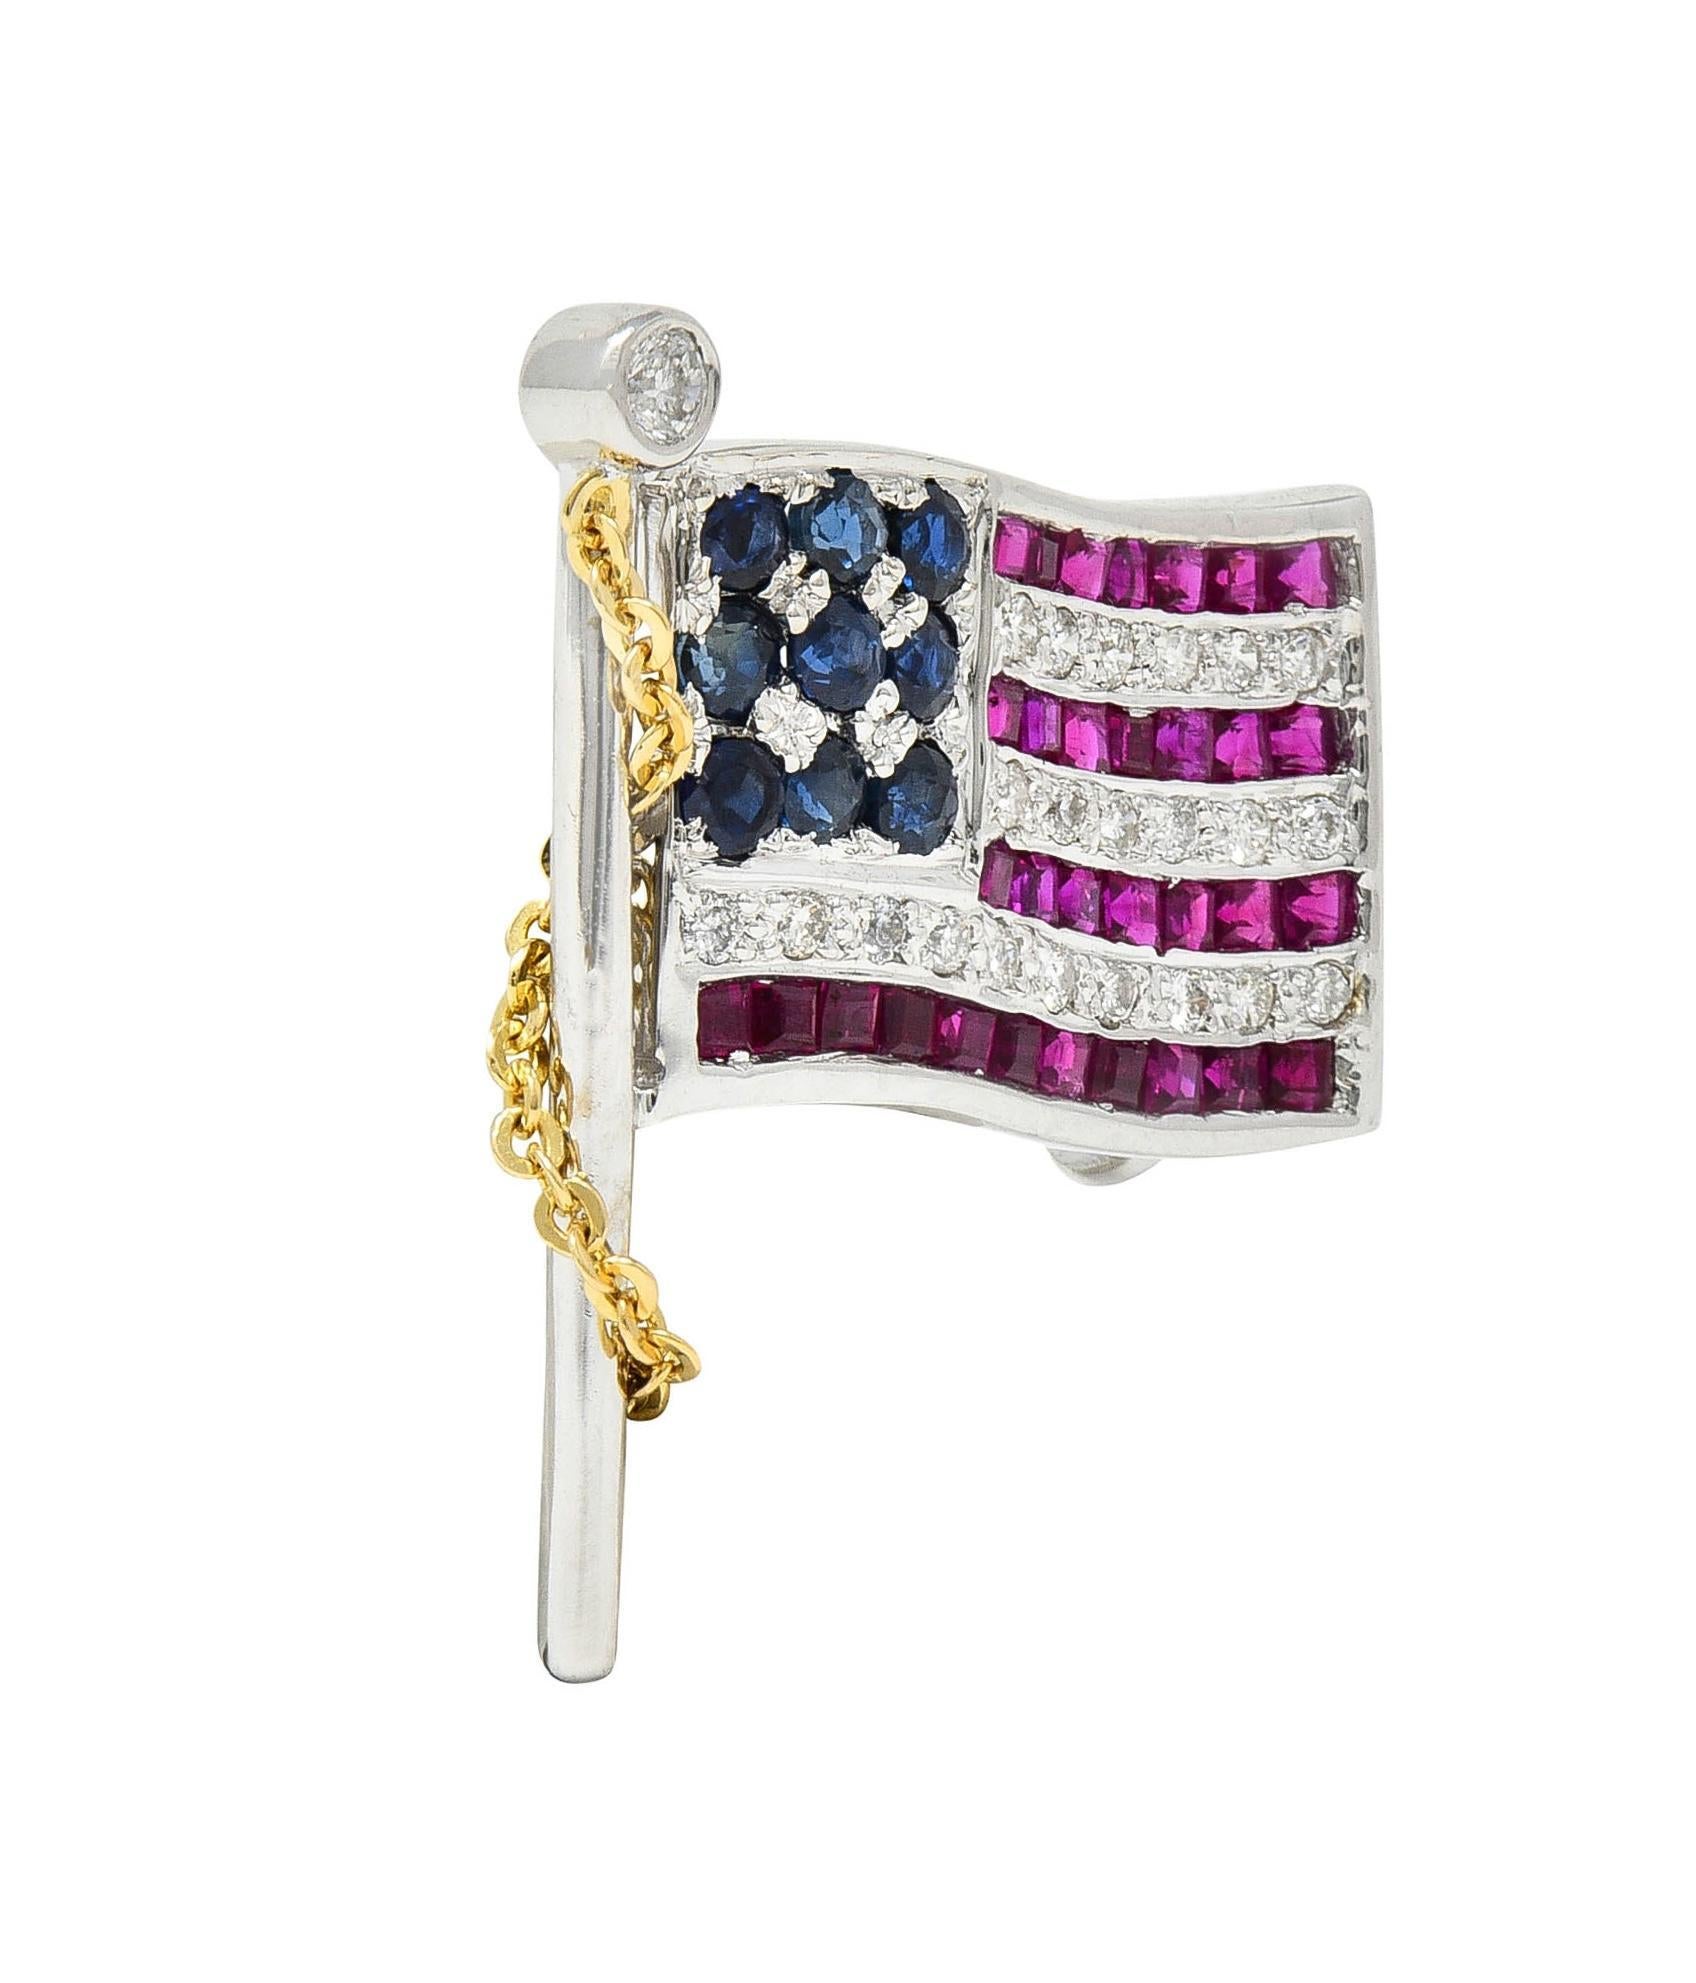 Designed as a white gold American flag comprised of sapphires, rubies, and diamonds 
Sapphires are round cut and transparent, medium to dark blue in color
Weighing approximately 0.36 carat total - bead set as stars
Rubies are square step-cut and